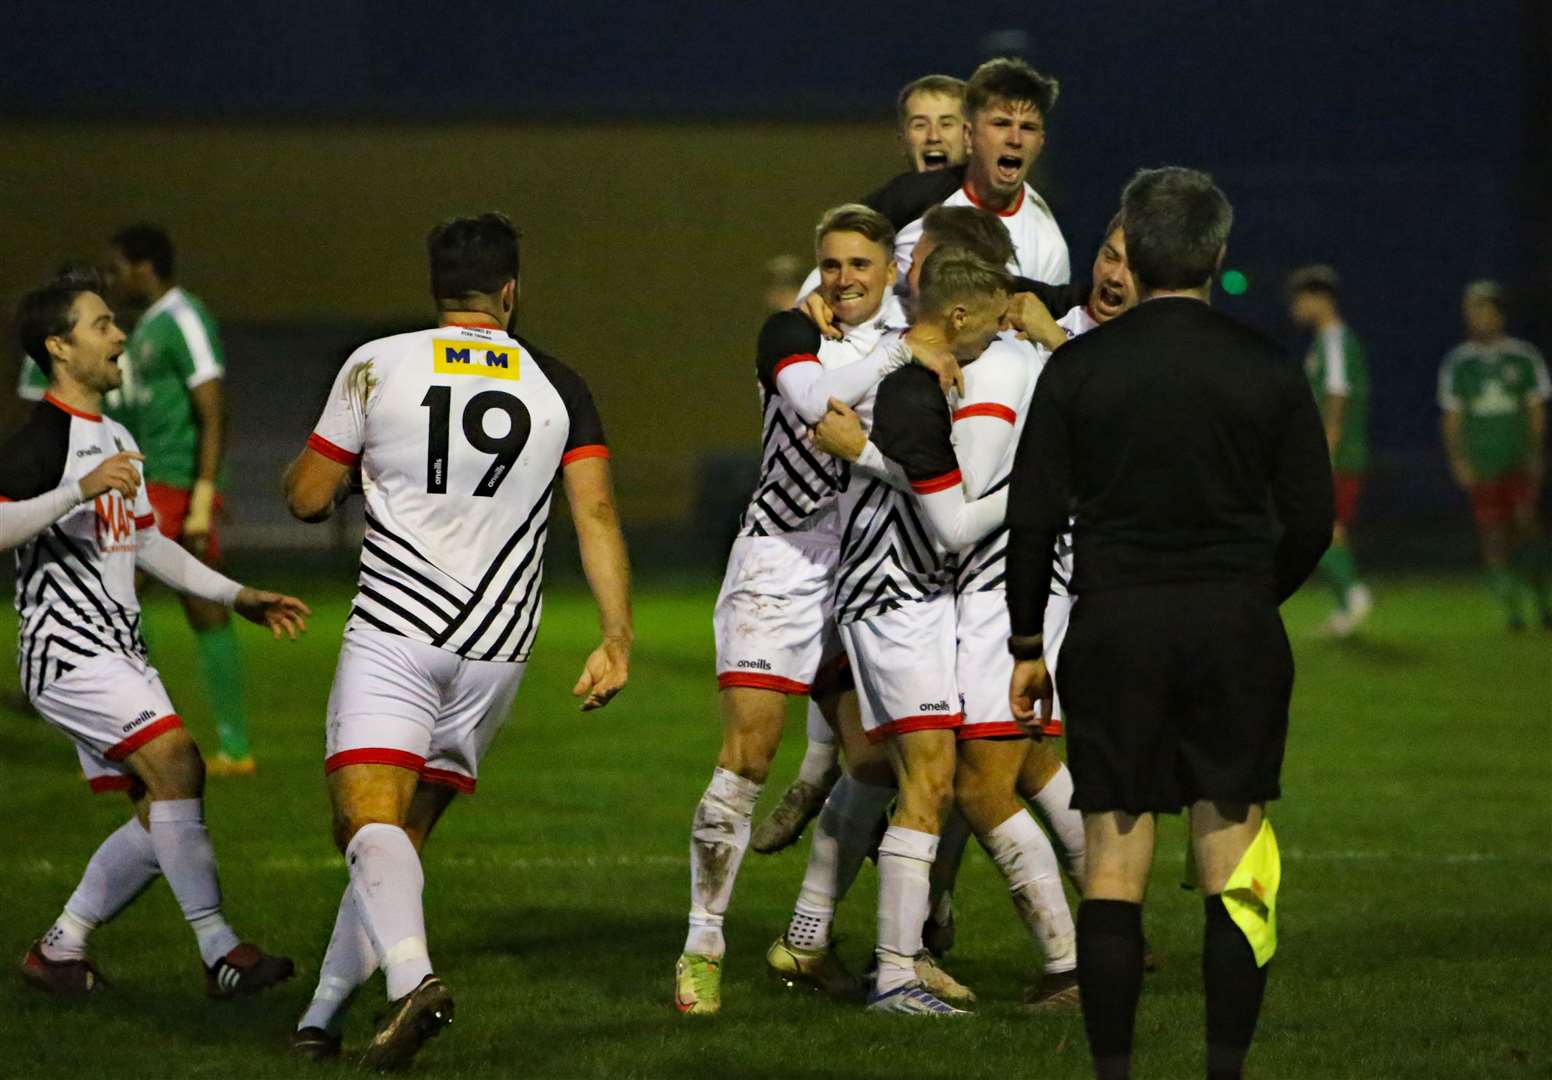 Deal Town's players celebrate Aaron Millbank's goal as they progressed in the FA Vase at Sporting Bengal. Picture: Paul Willmott